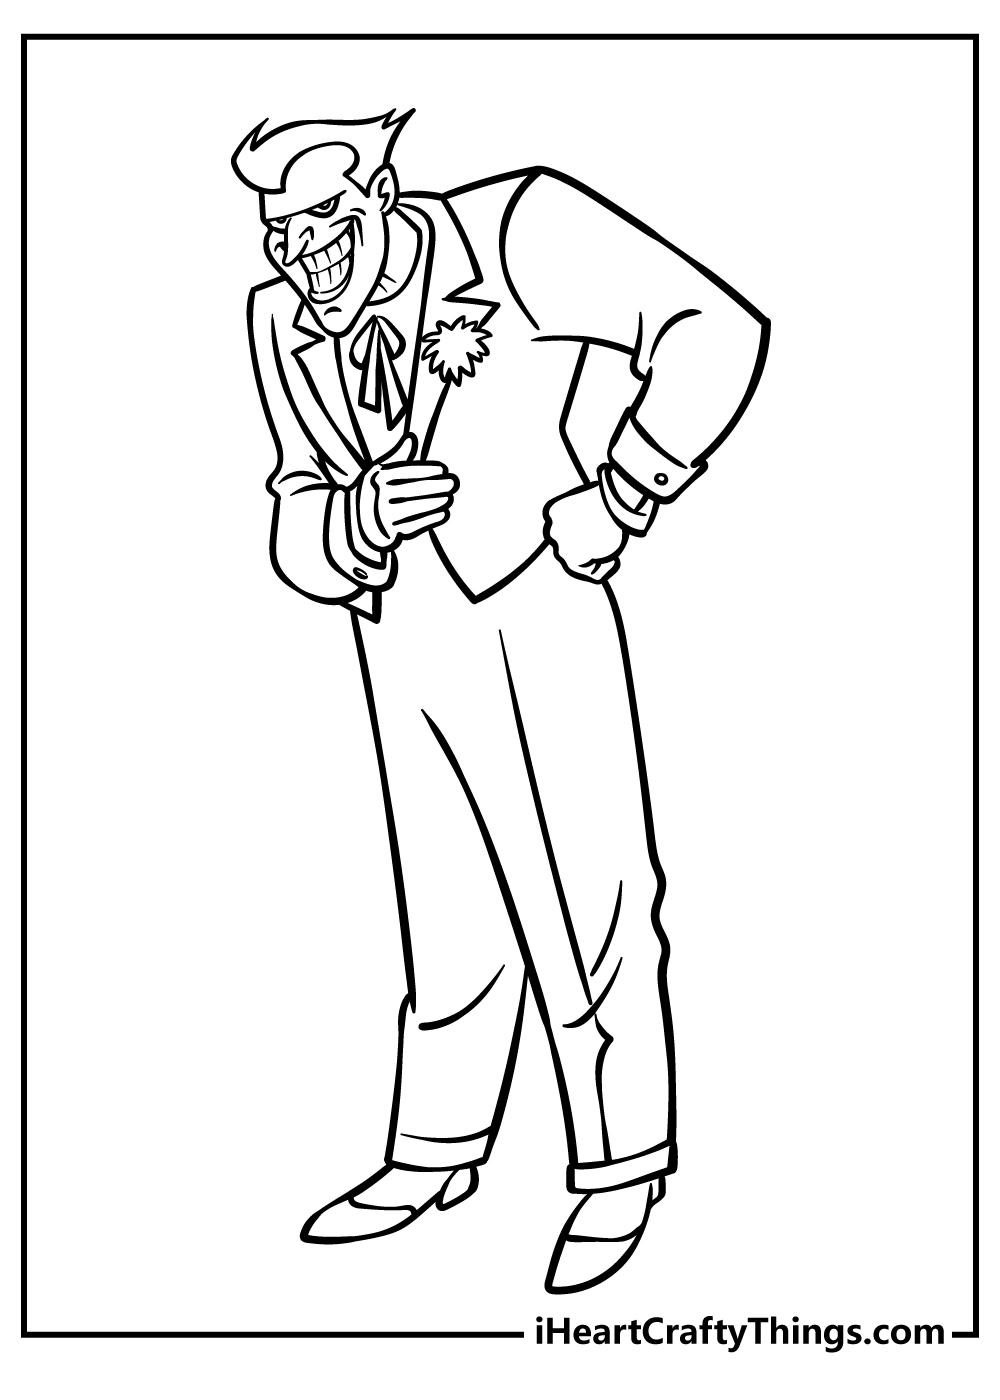 Joker Coloring Pages for adults free printable